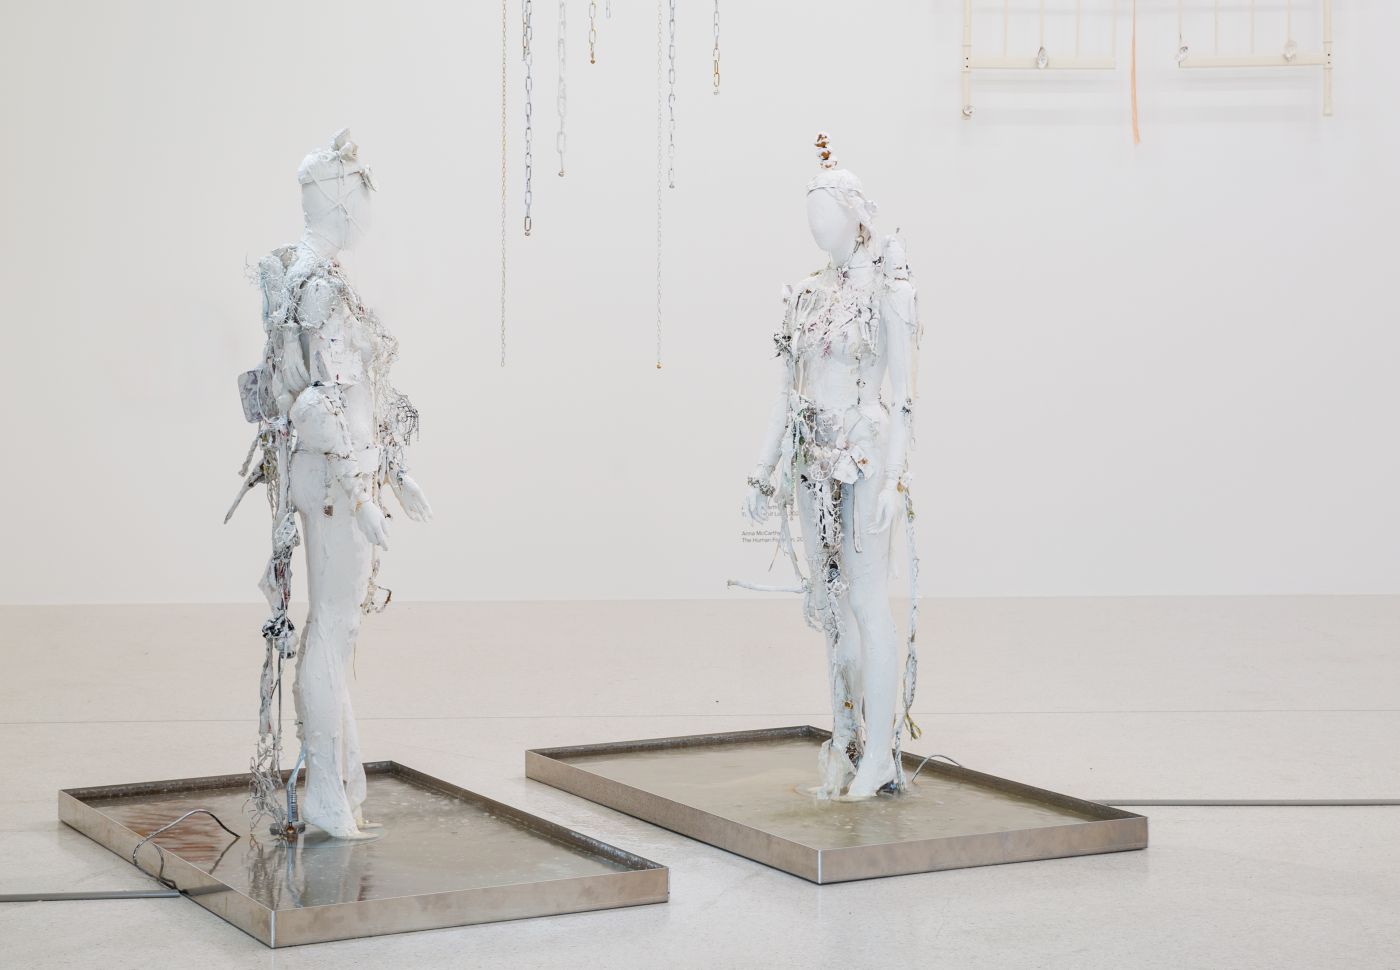 The Human Fountain, 2021, mixed media, dimensions variable, in "Nimmersatt? Imagining Society without Growth", installation view at Westfälischer Kunstverein, photos: LWL/Hanna Neander